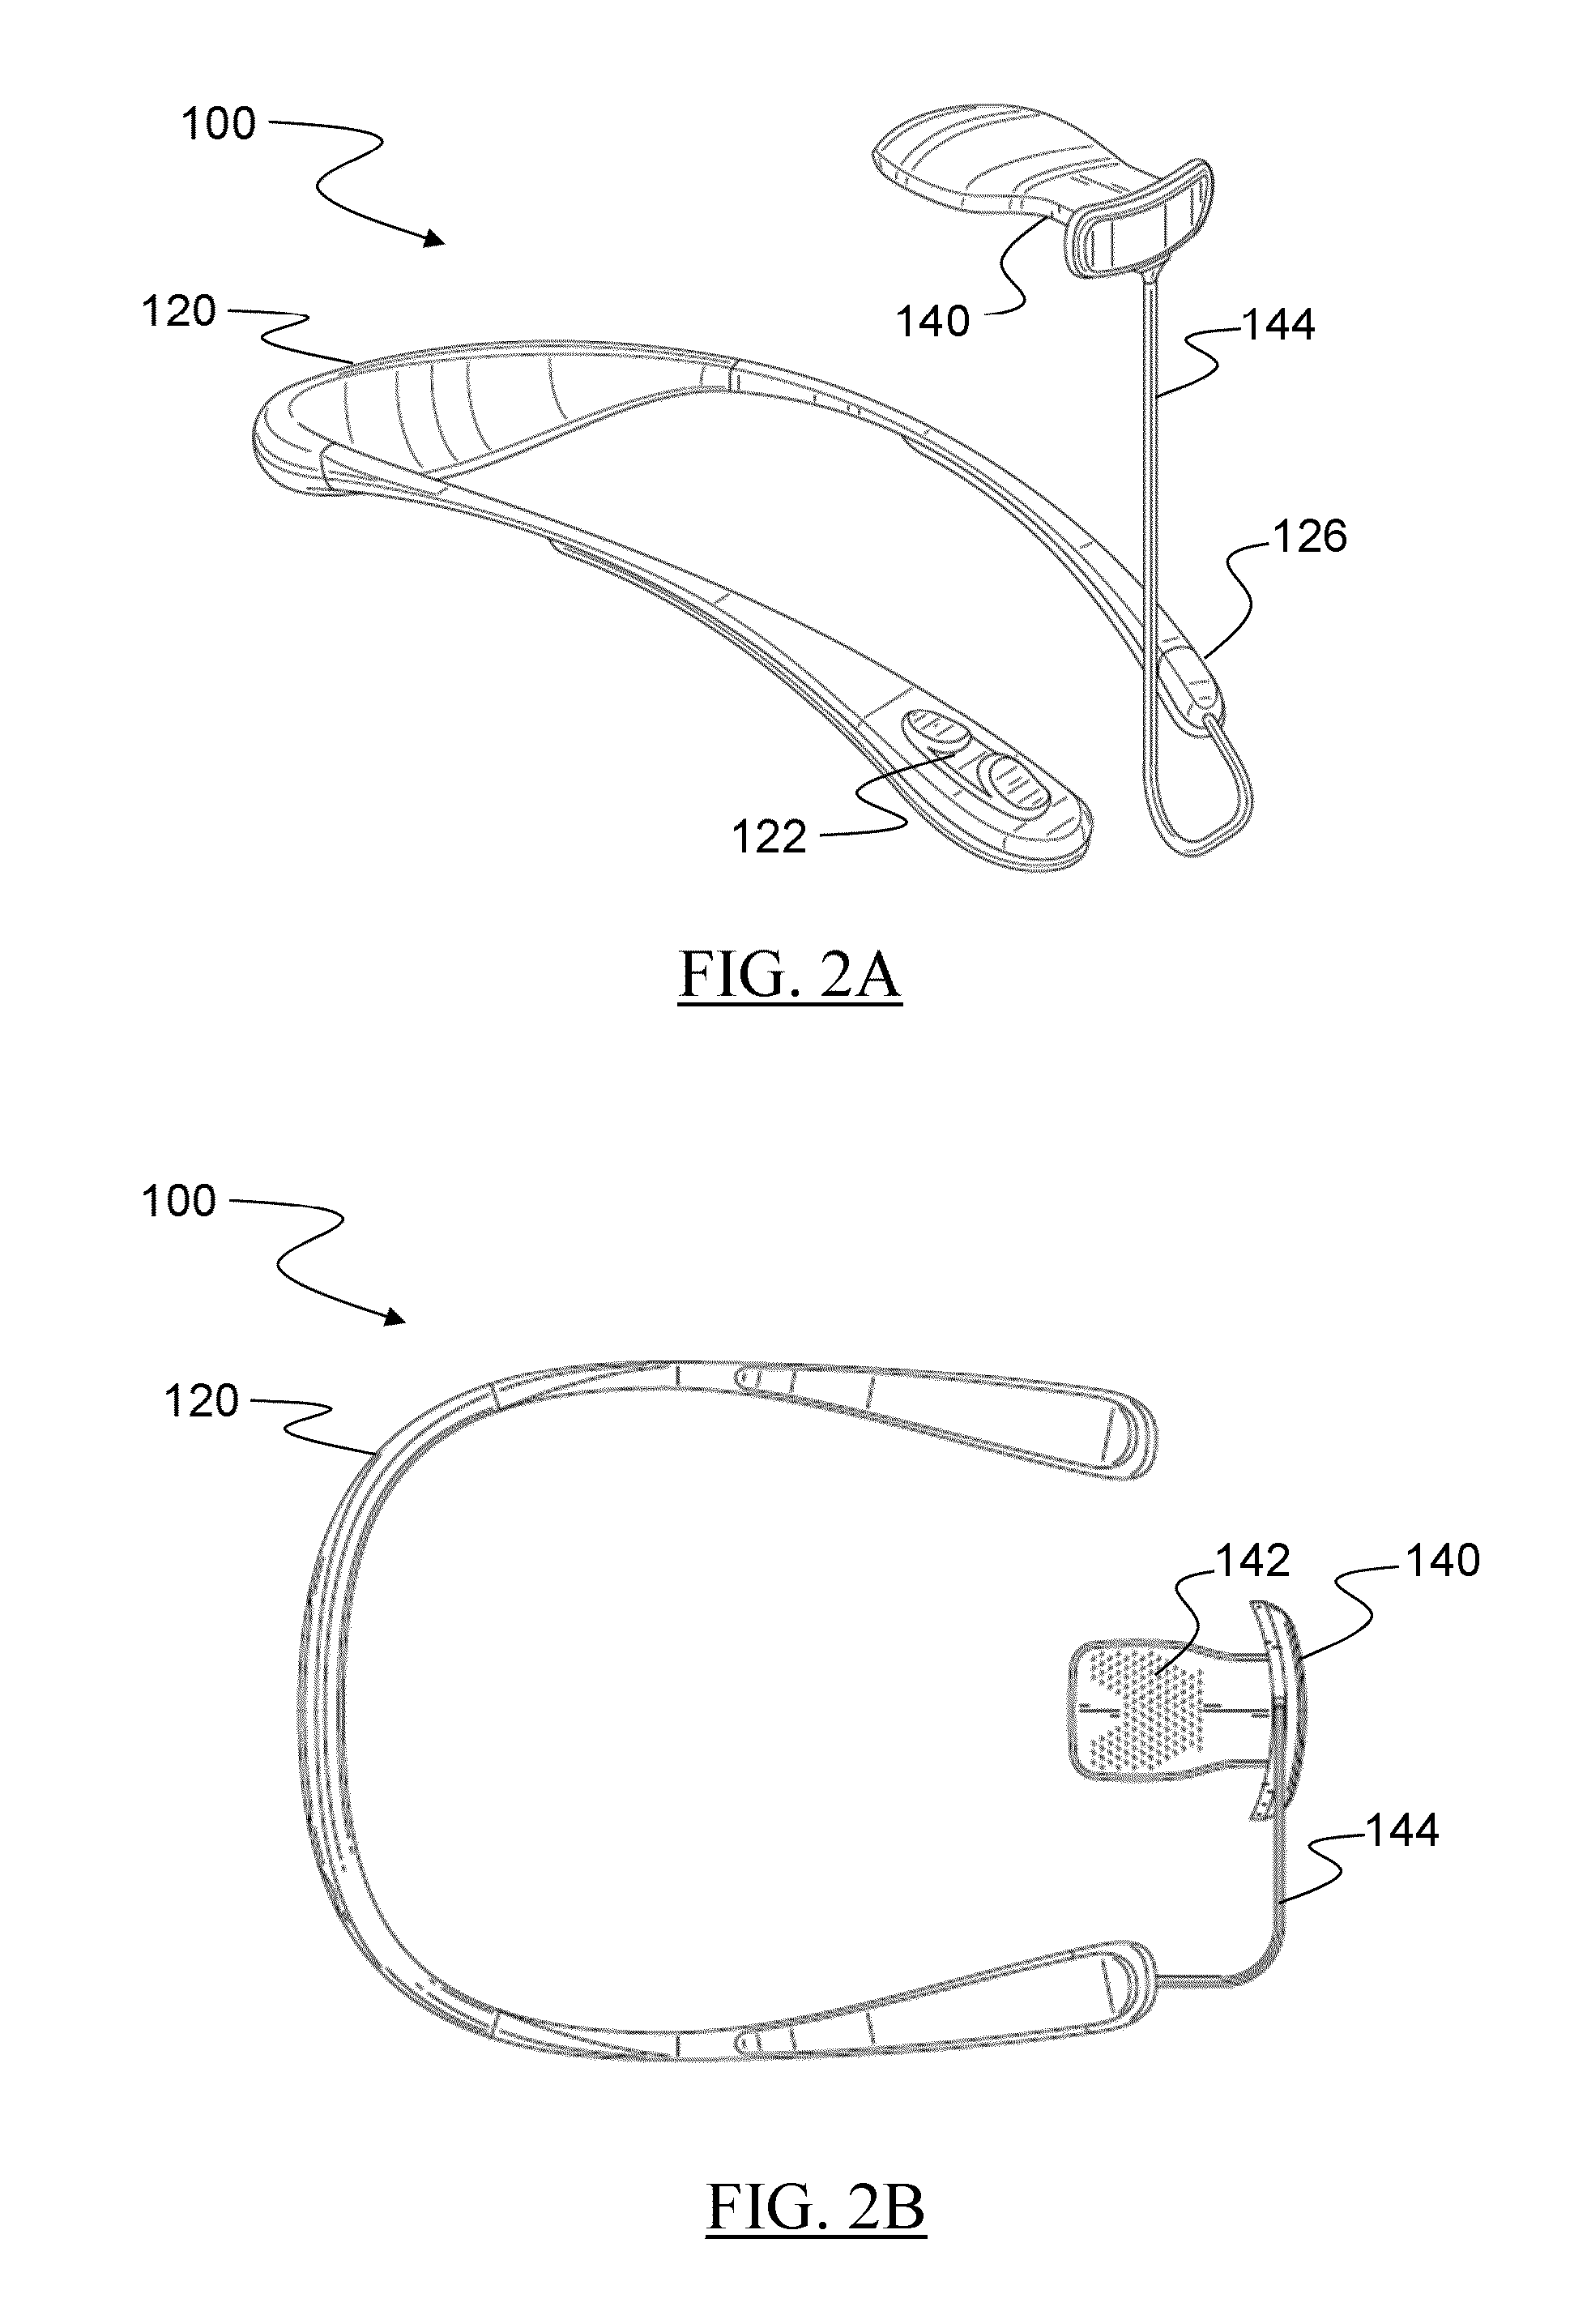 Systems and Methods for Providing Non-Invasive Neurorehabilitation of a Patient